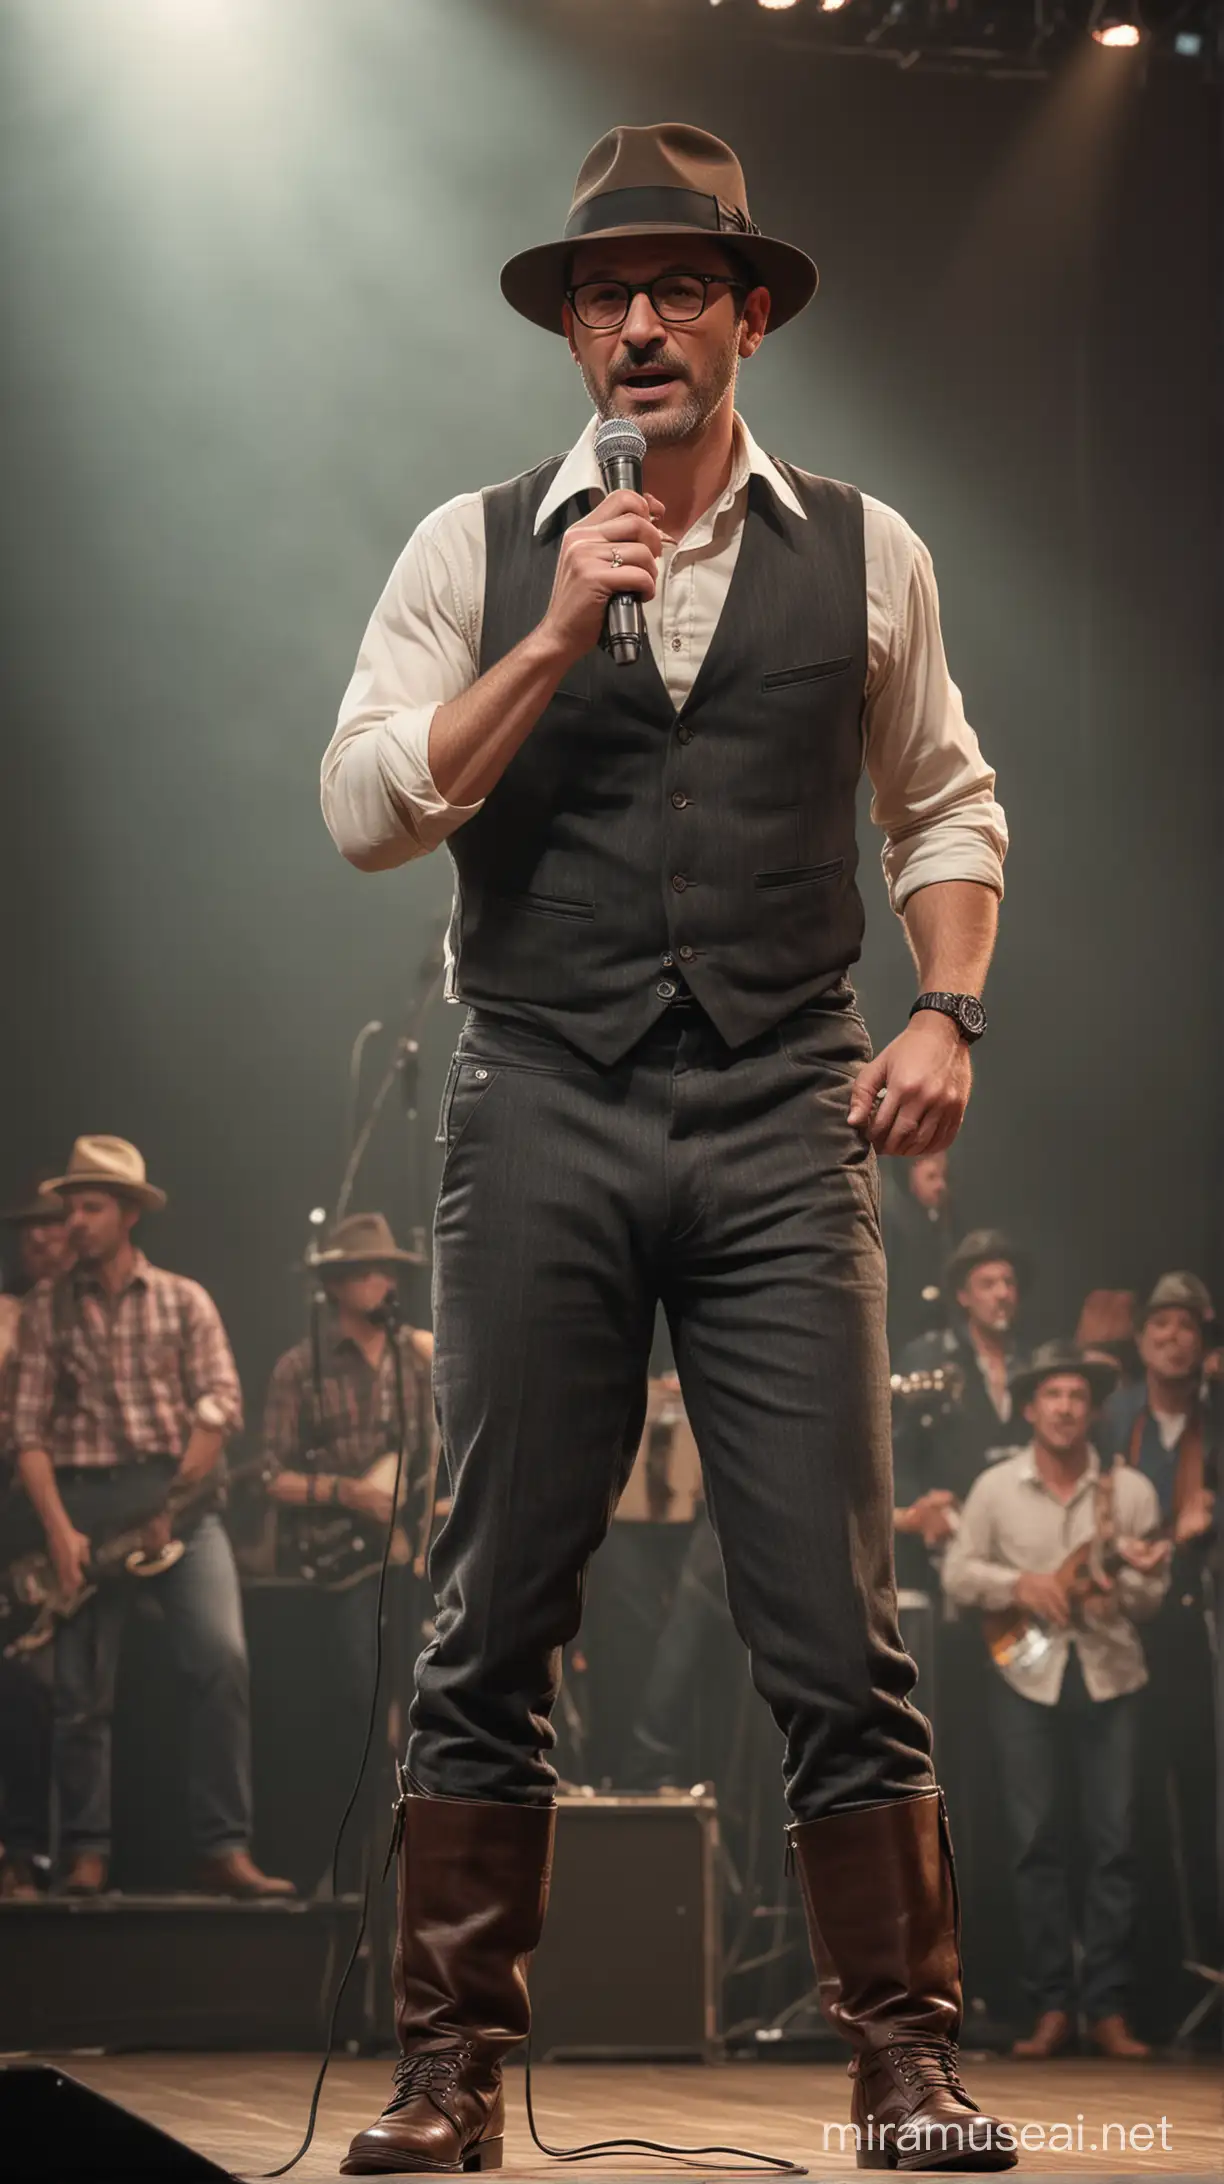 Close up 46 years old man, handsome, glasses, shortpants, leather boots, fedora hat, old school microphone, singing on stage, full body, realistic, detiles, the audience surrounds the stage.